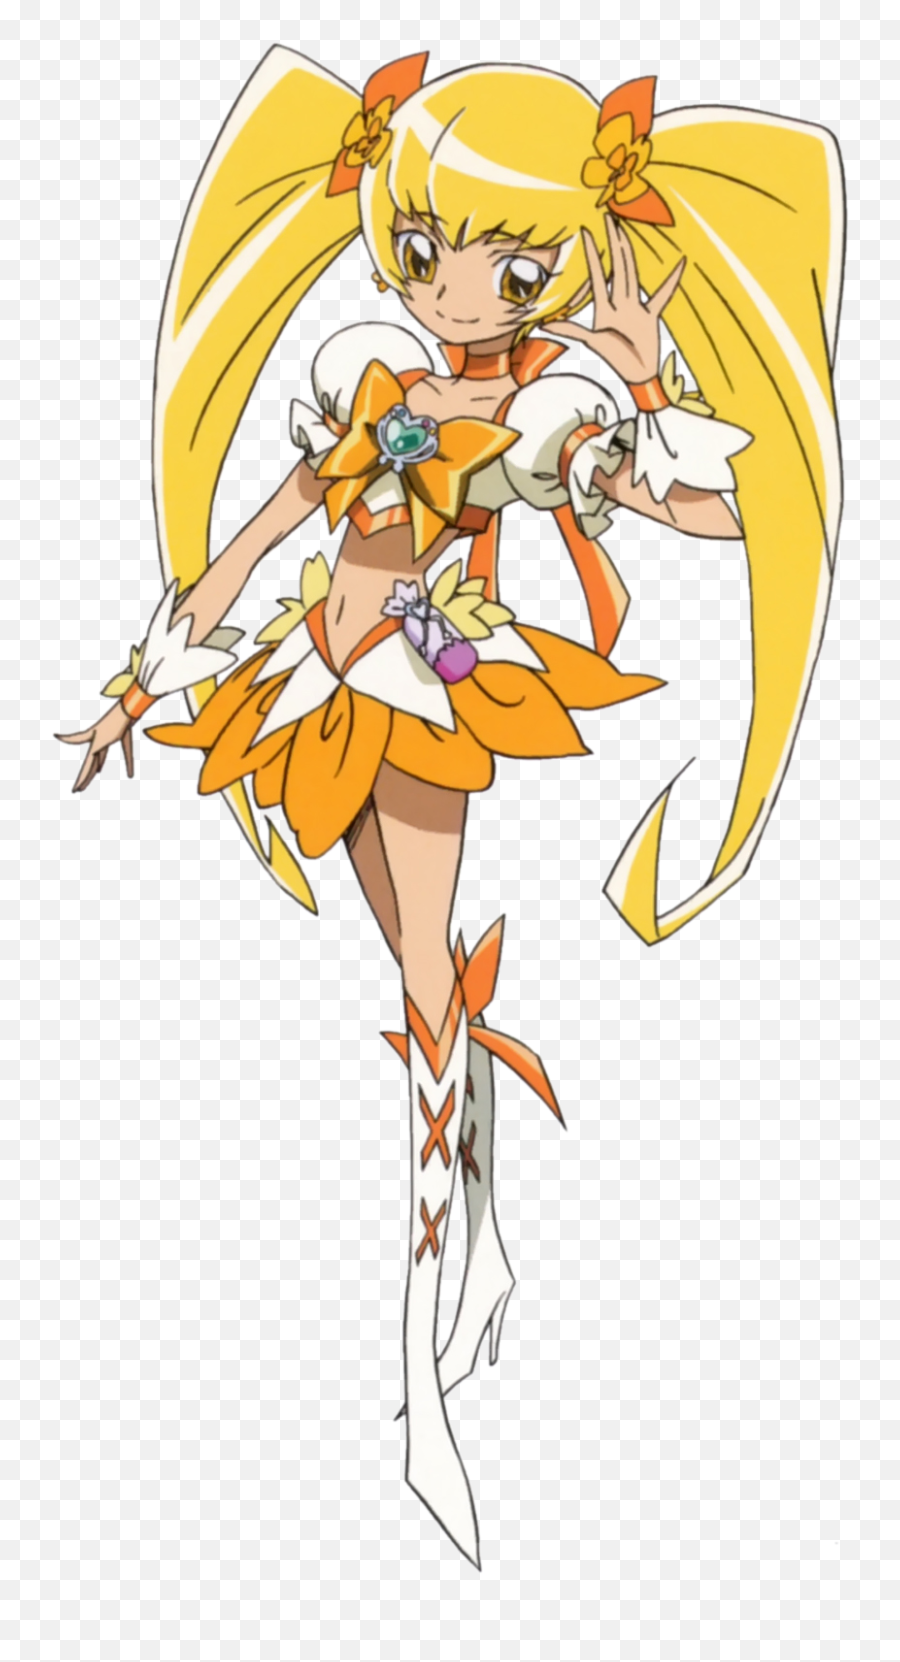 Download Pretty Cure Sunshine Png Image With No - Heartcatch Precure Cure Sunshine,Sunshine Png